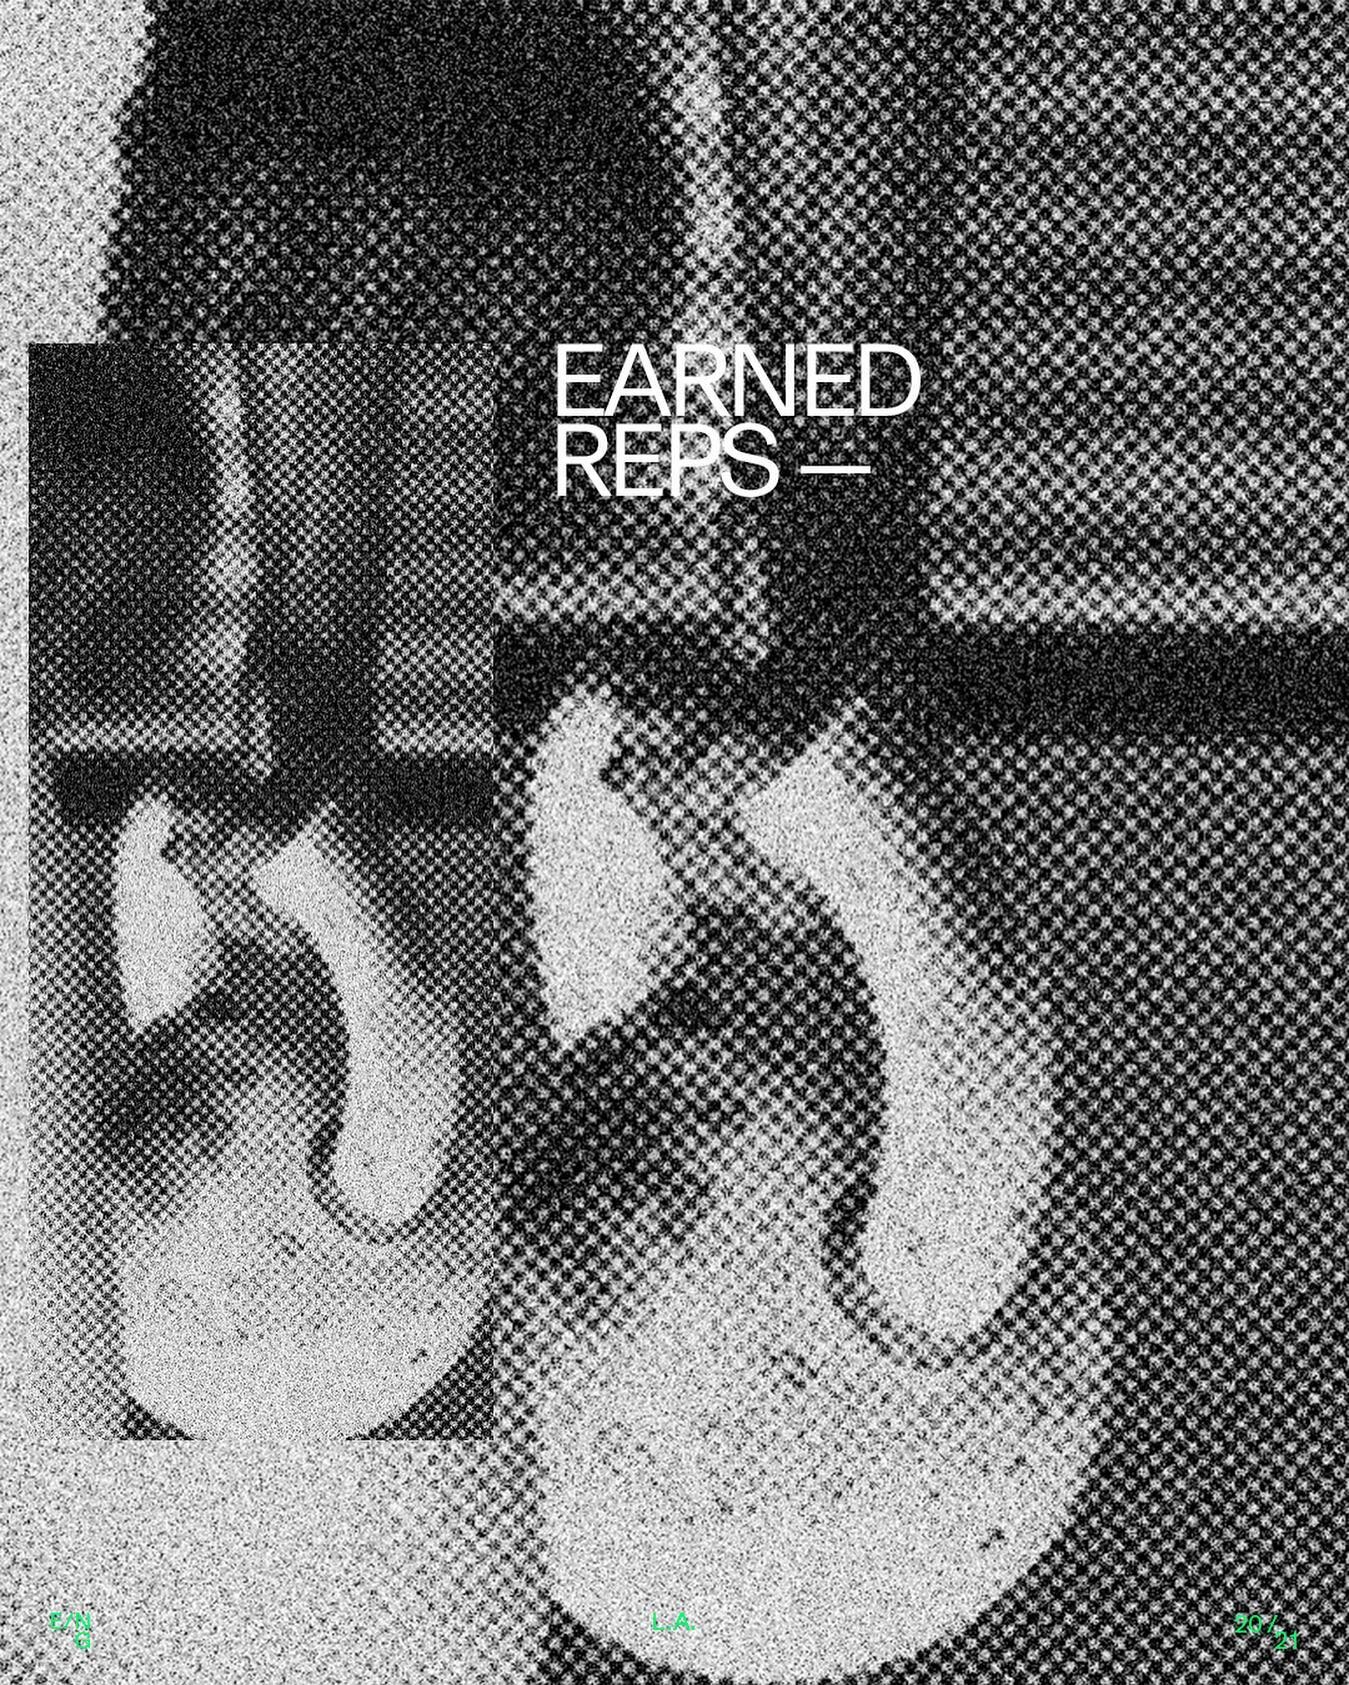 INTRODUCING EARNED REPS&mdash;12/13&ndash;6PM AT @VITRU_LA.

Show off and show out with your E/NG family! Join us for a night of personal best challenges to celebrate the culmination of this year&rsquo;s work. E/NG Club members, DM us for the curricu